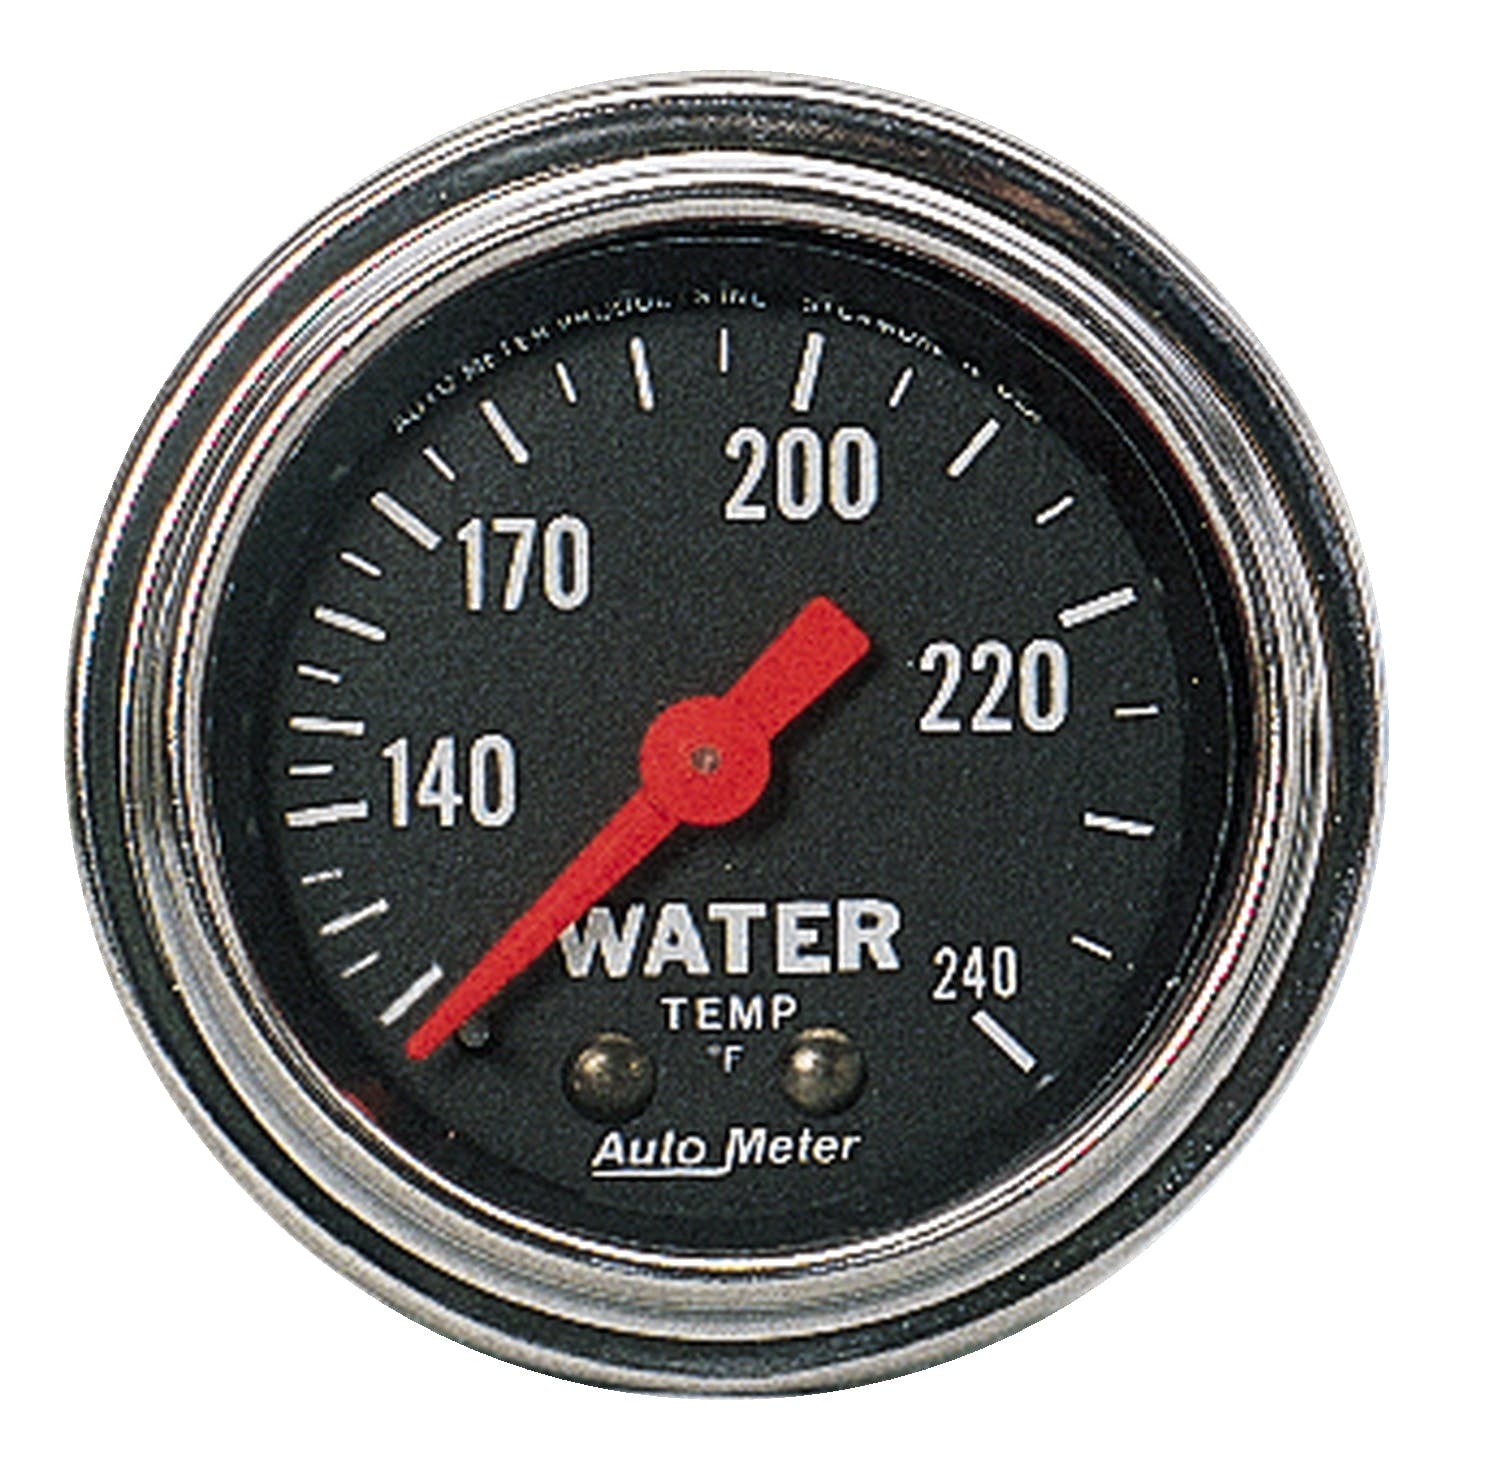 AutoMeter Products 2432 Water Temp 120-240 F